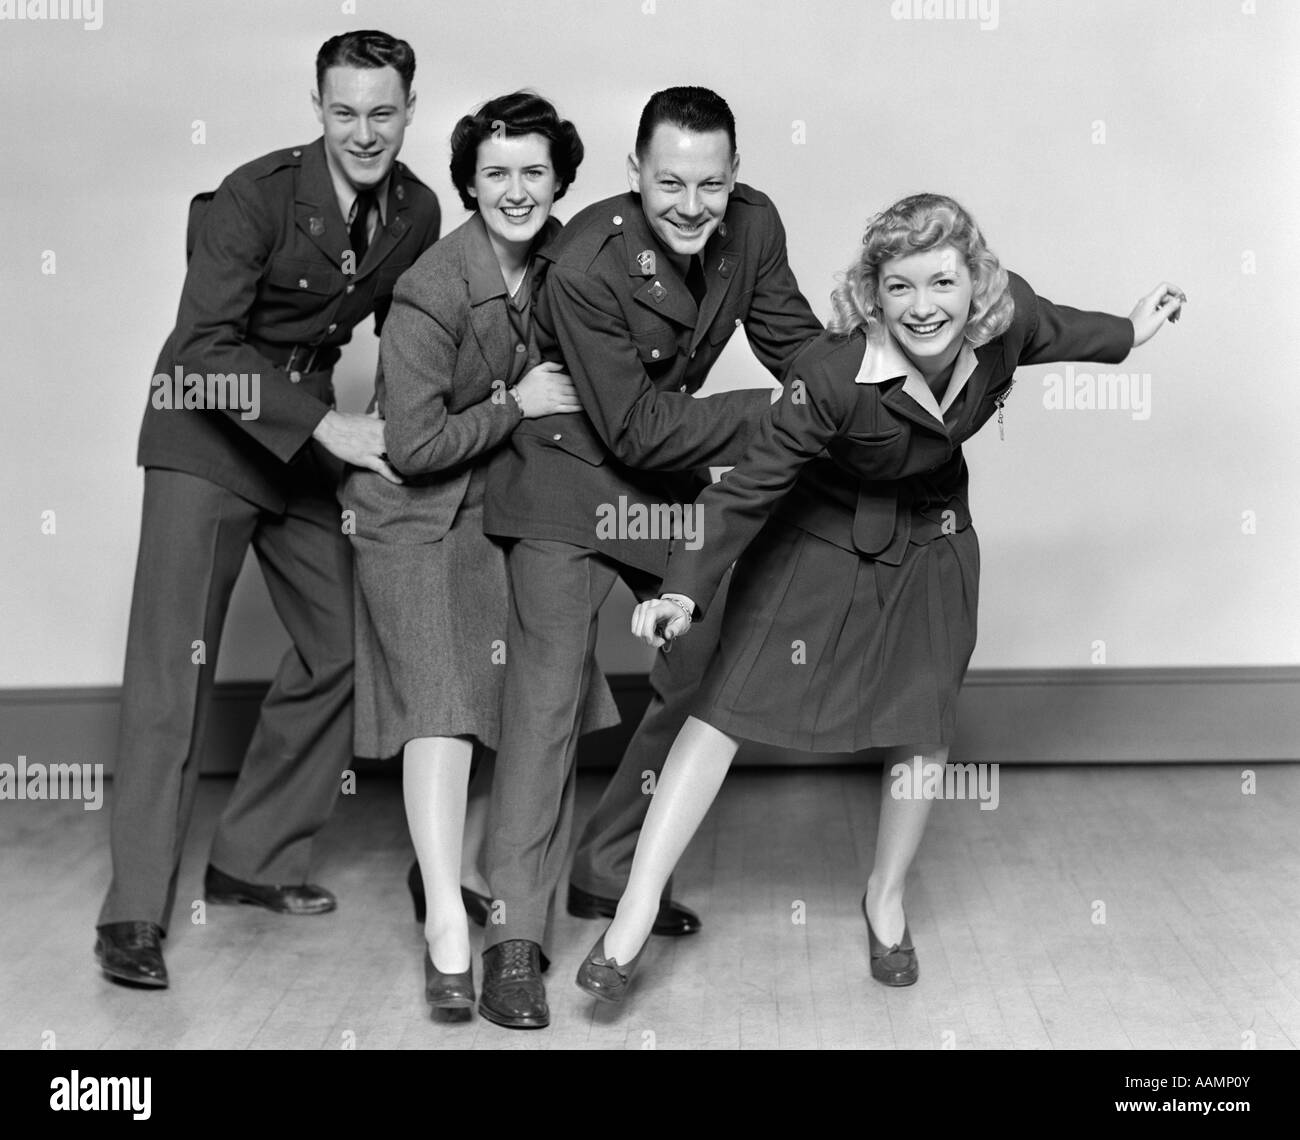 1940s CONGA LINE TWO MEN SOLDIERS AND TWO WOMEN DANCING SMILING LOOKING AT CAMERA Stock Photo